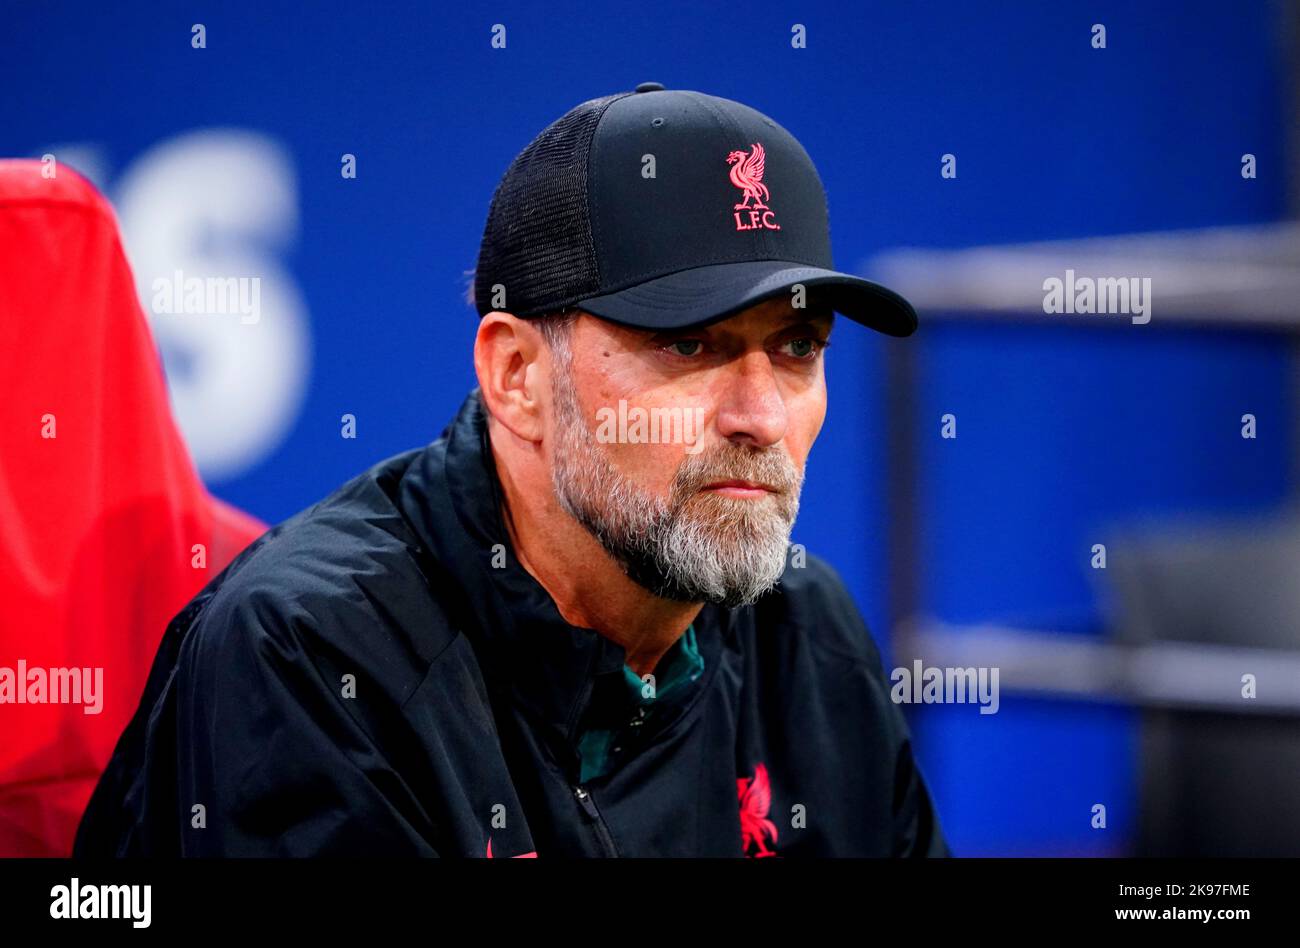 Liverpool manager Jurgen Klopp ahead of the UEFA Champions League group A match at the Johan Cruyff Arena in Amsterdam, Netherlands. Picture date: Wednesday October 26, 2022. Stock Photo